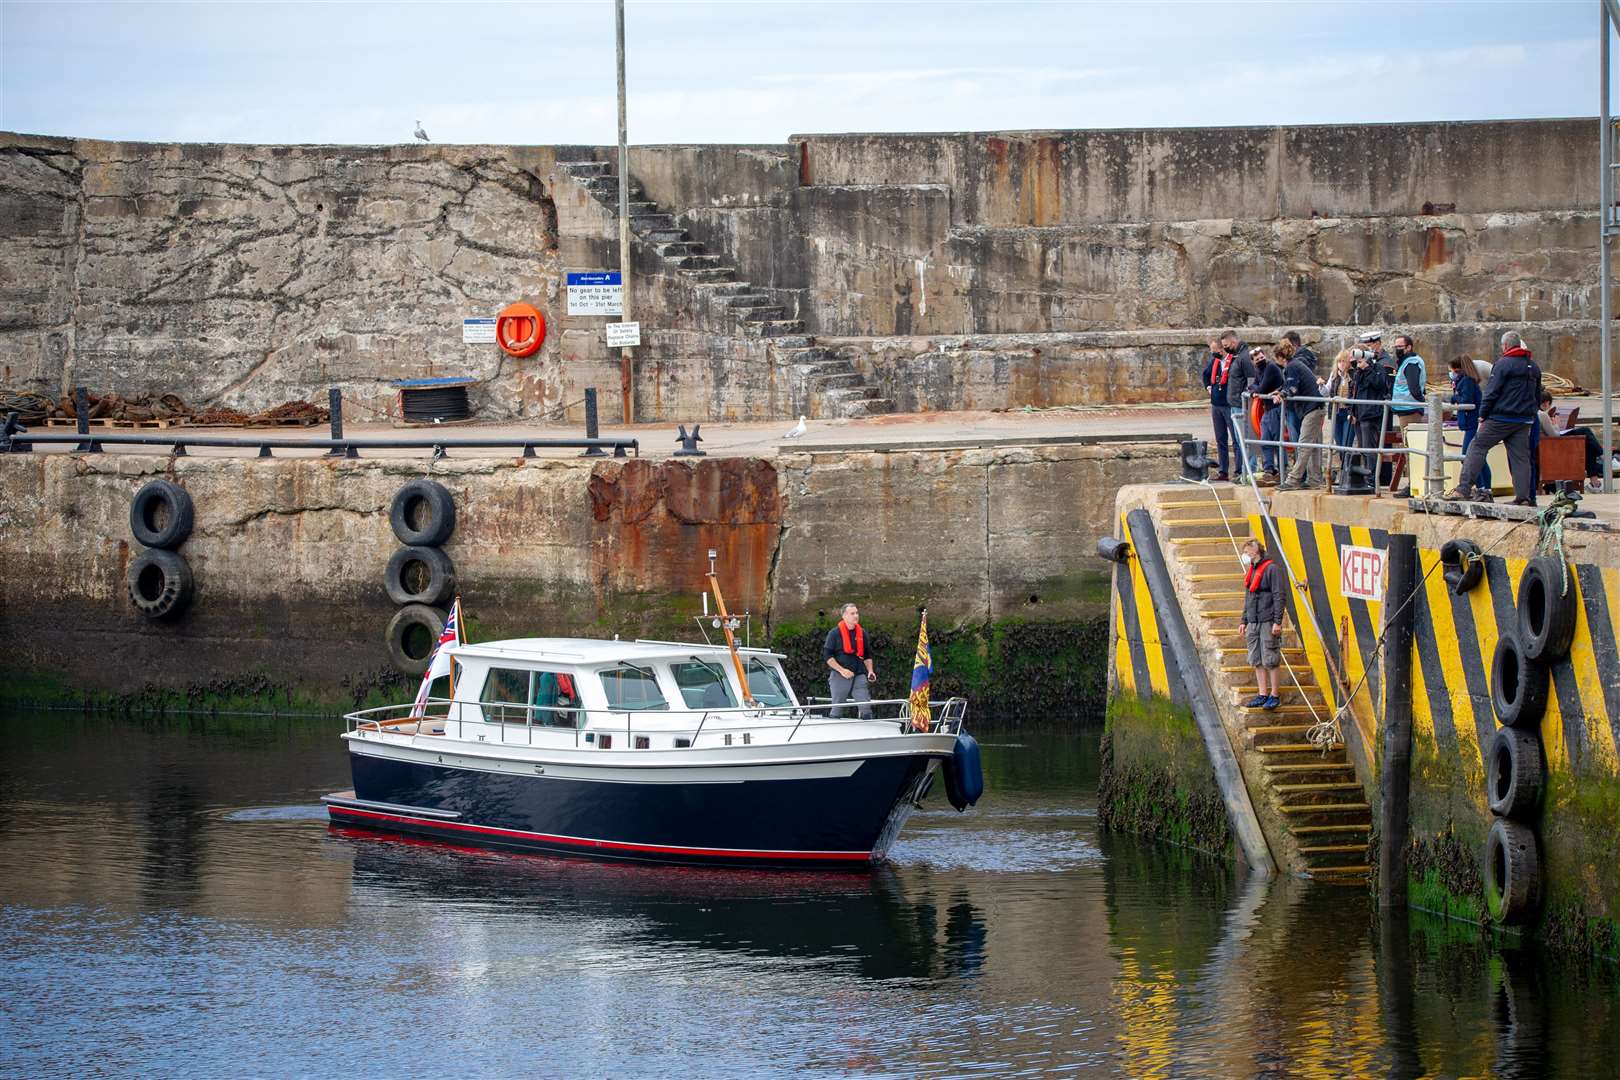 A boat arrives at Macduff Harbour as part of filming for Netflix hit The Crown. Picture: Daniel Forsyth.